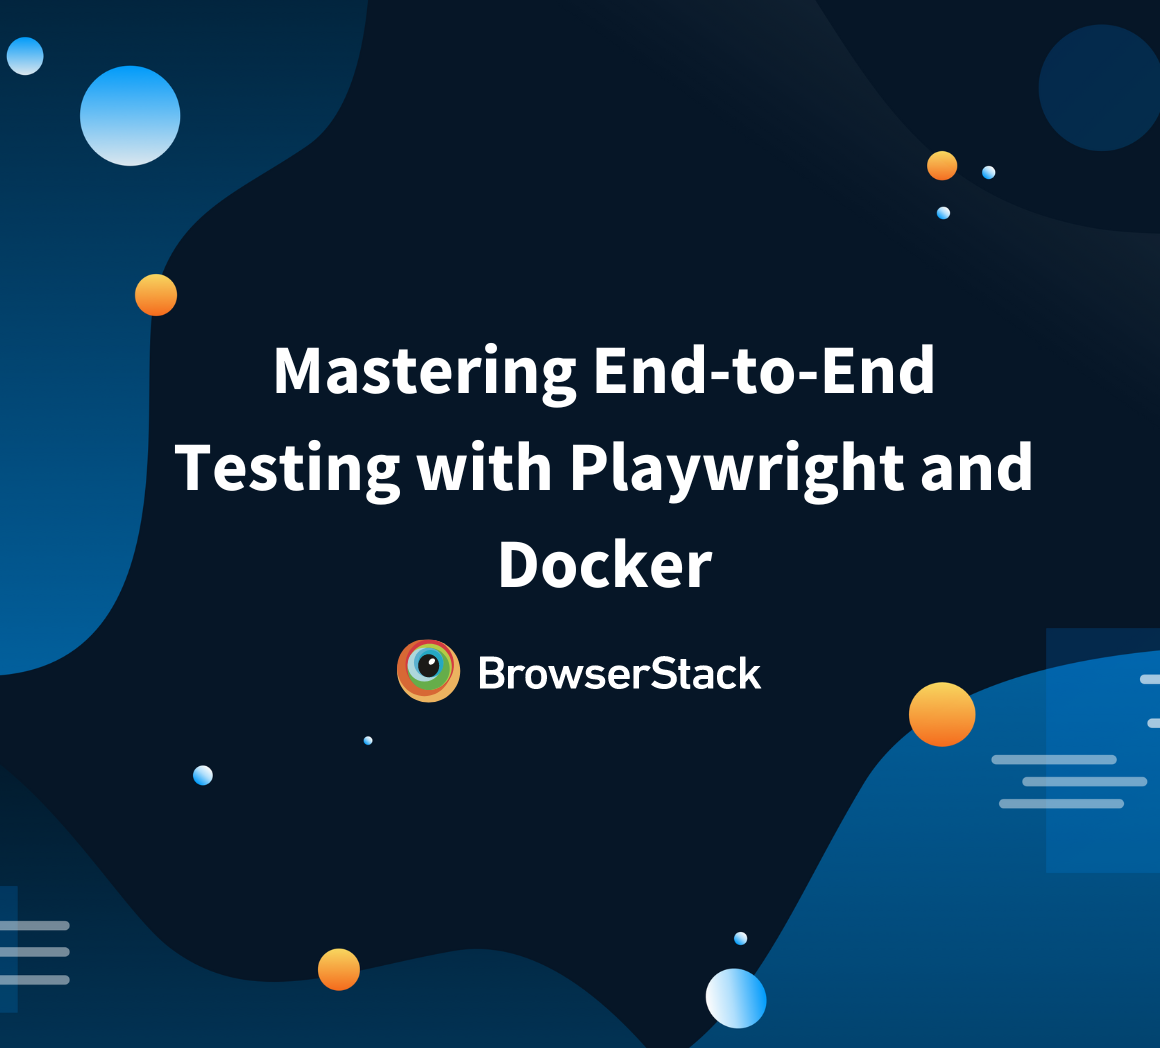 Mastering End-to-End Testing with Playwright and Docker